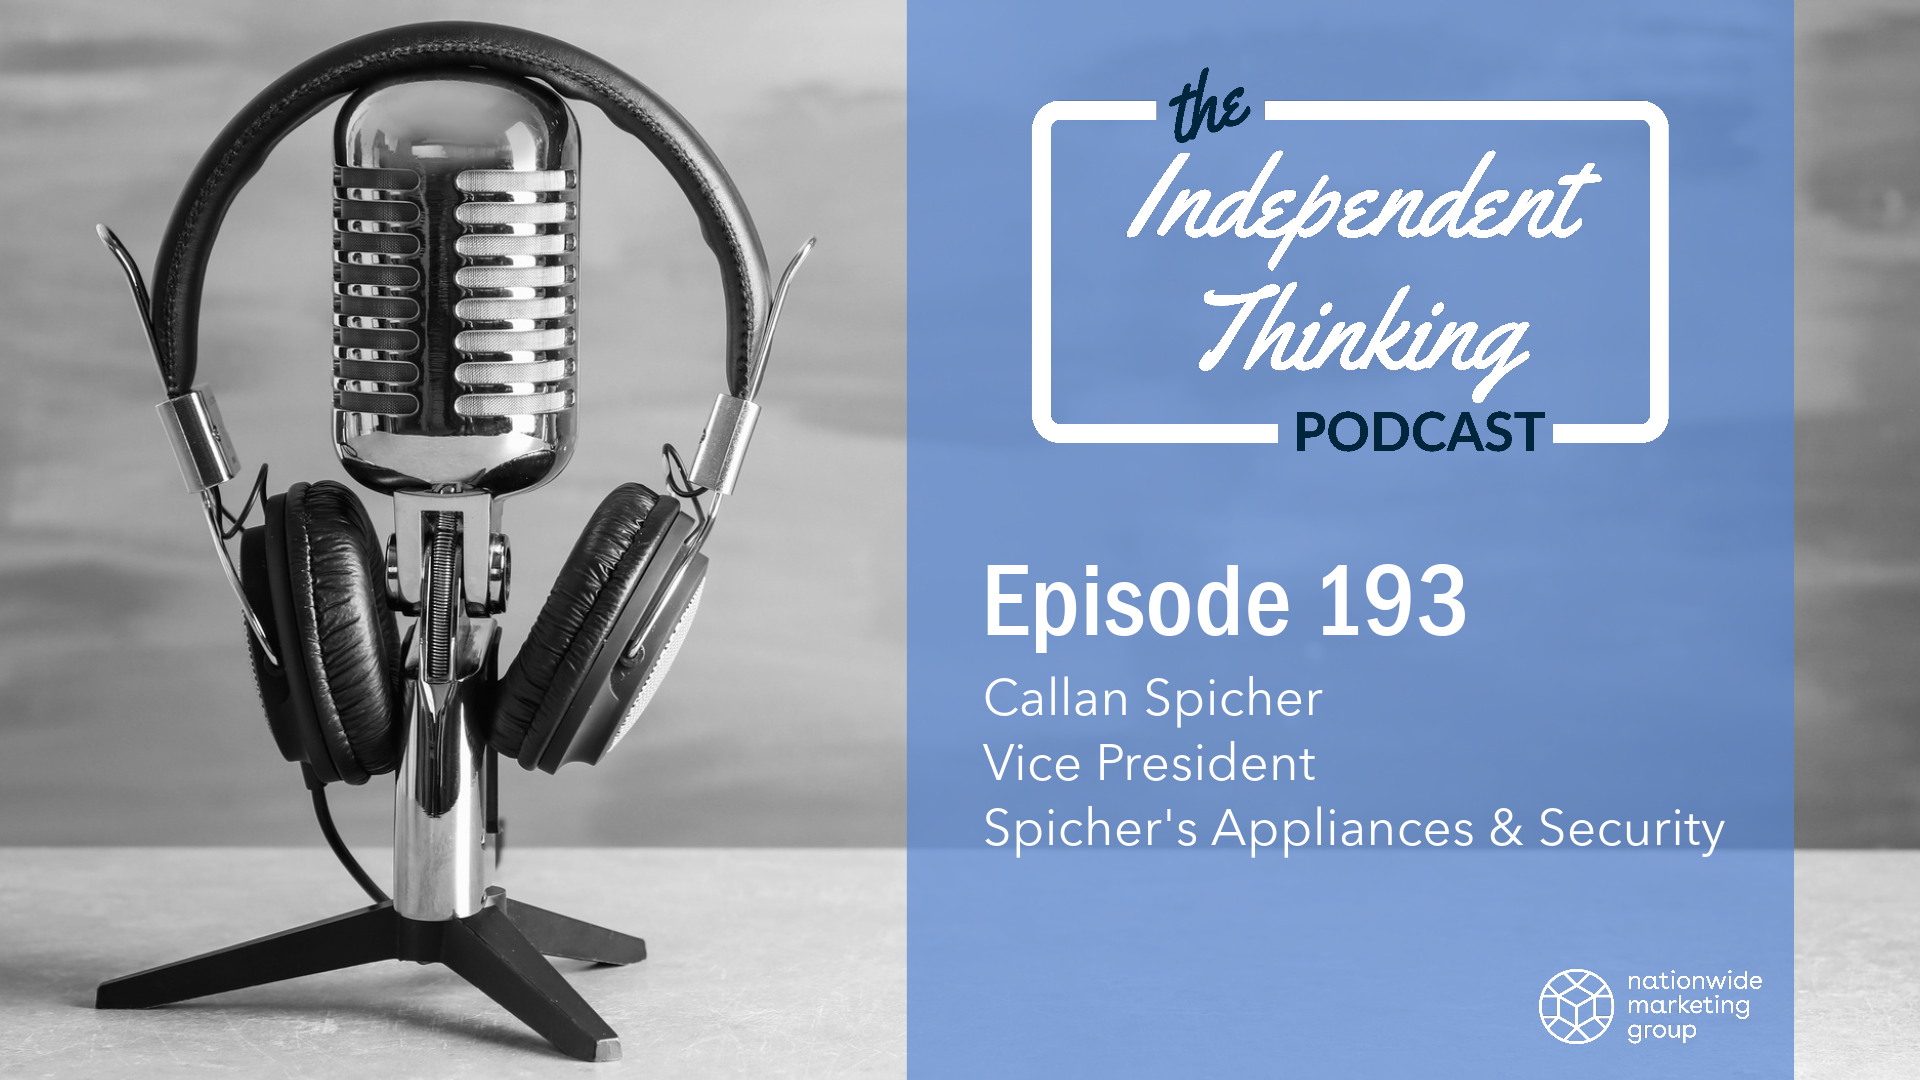 Spicher's appliances & security independent thinking podcast